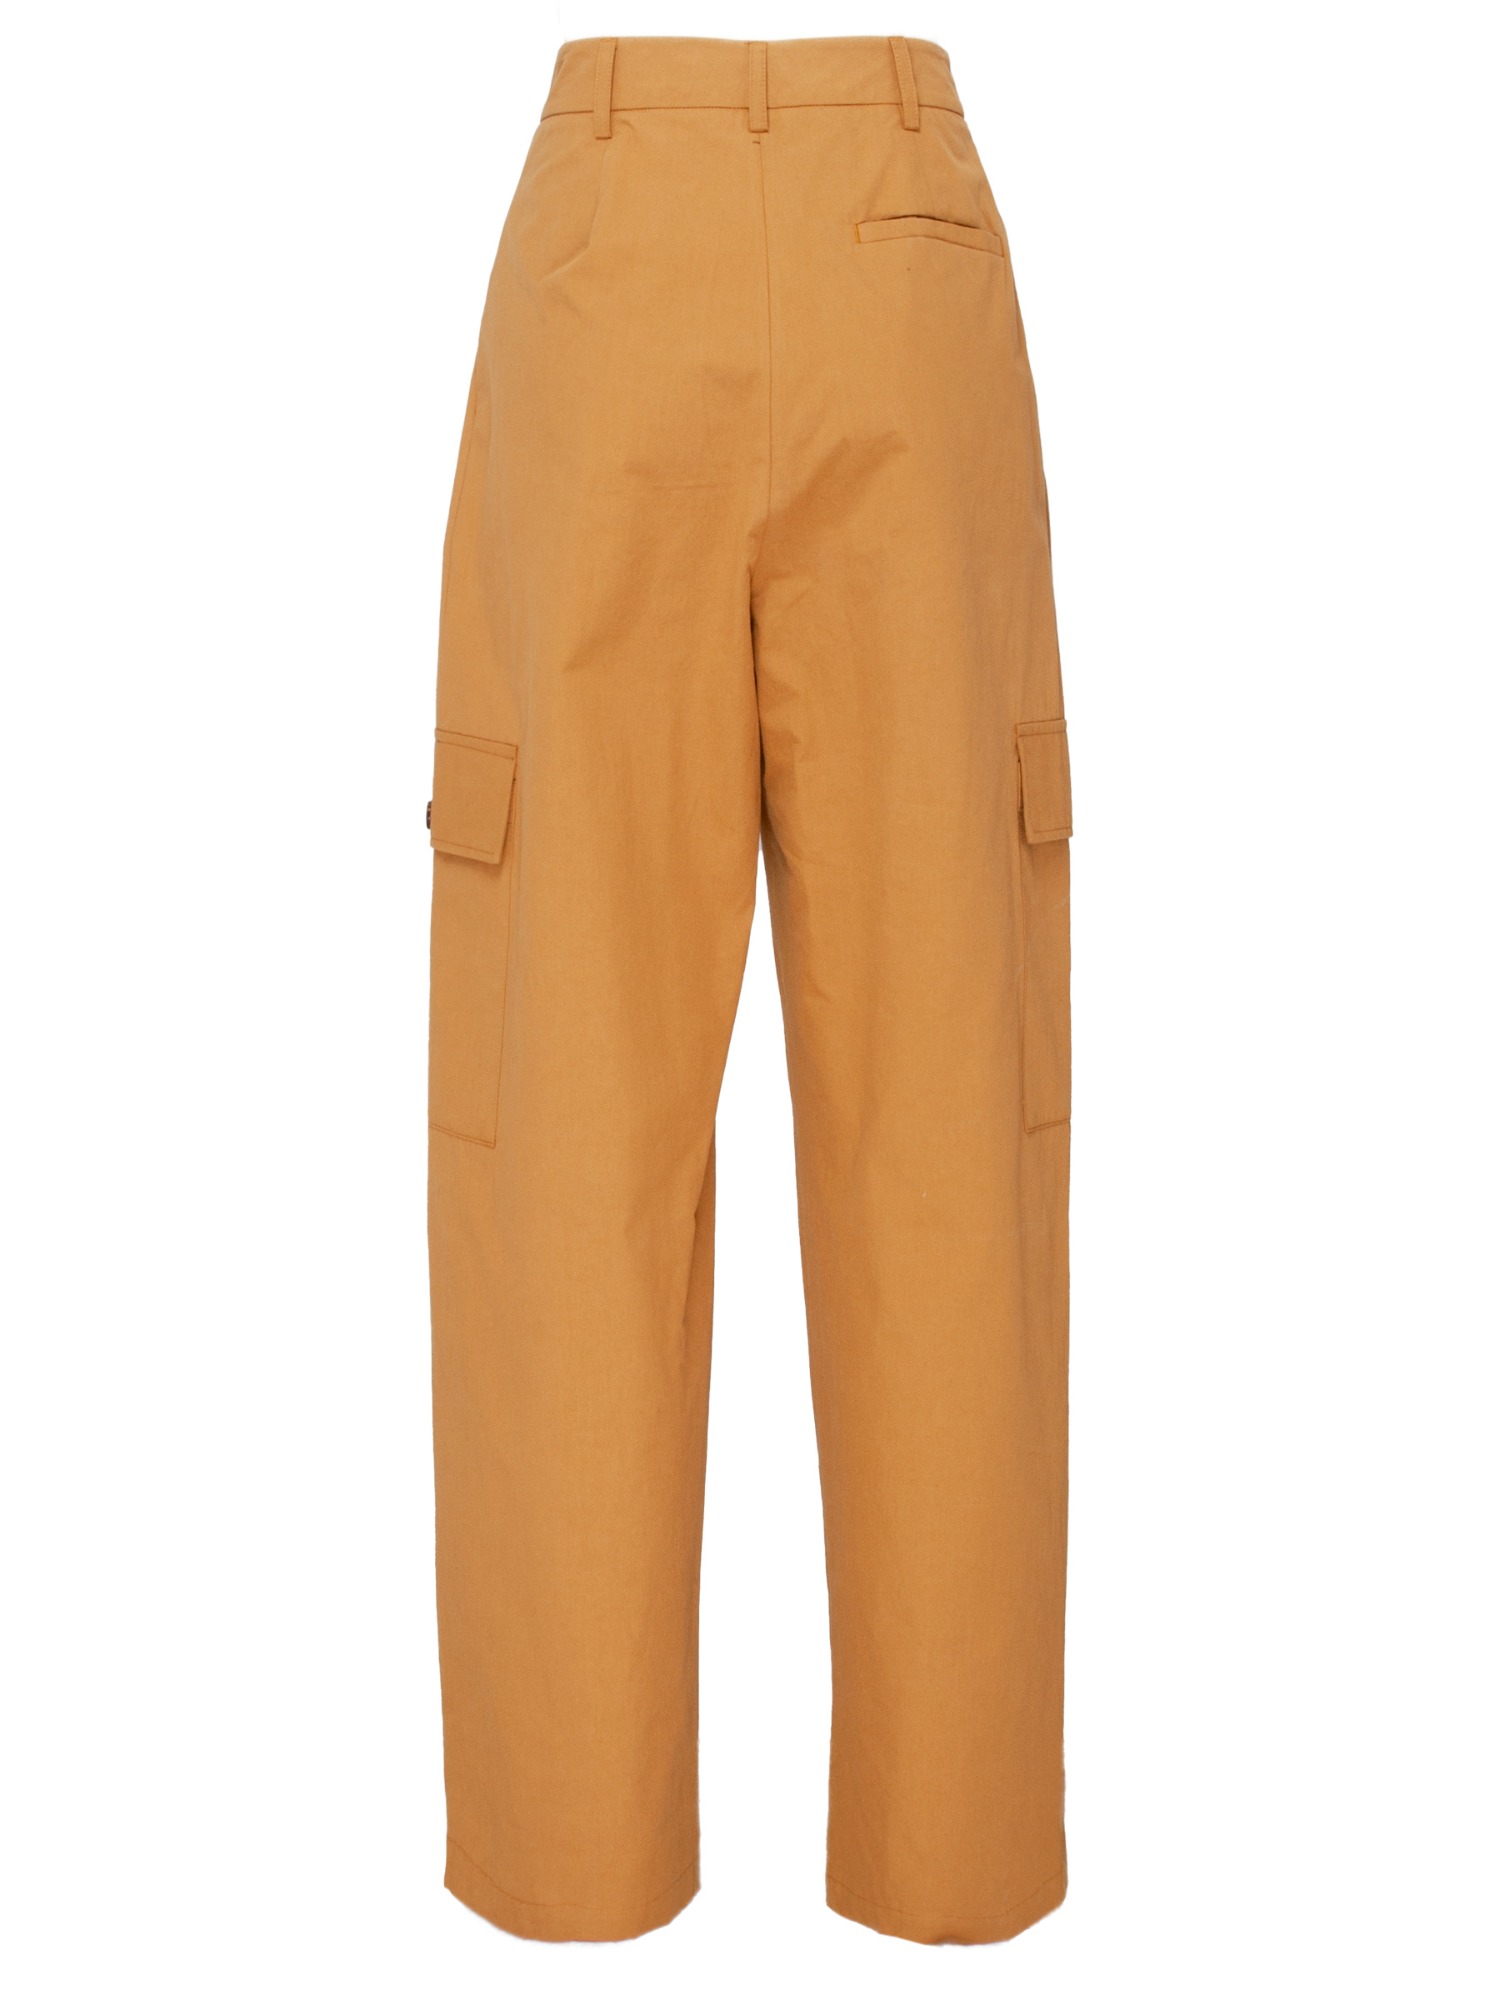 ATTIC AND BARN FAYETTE PANT